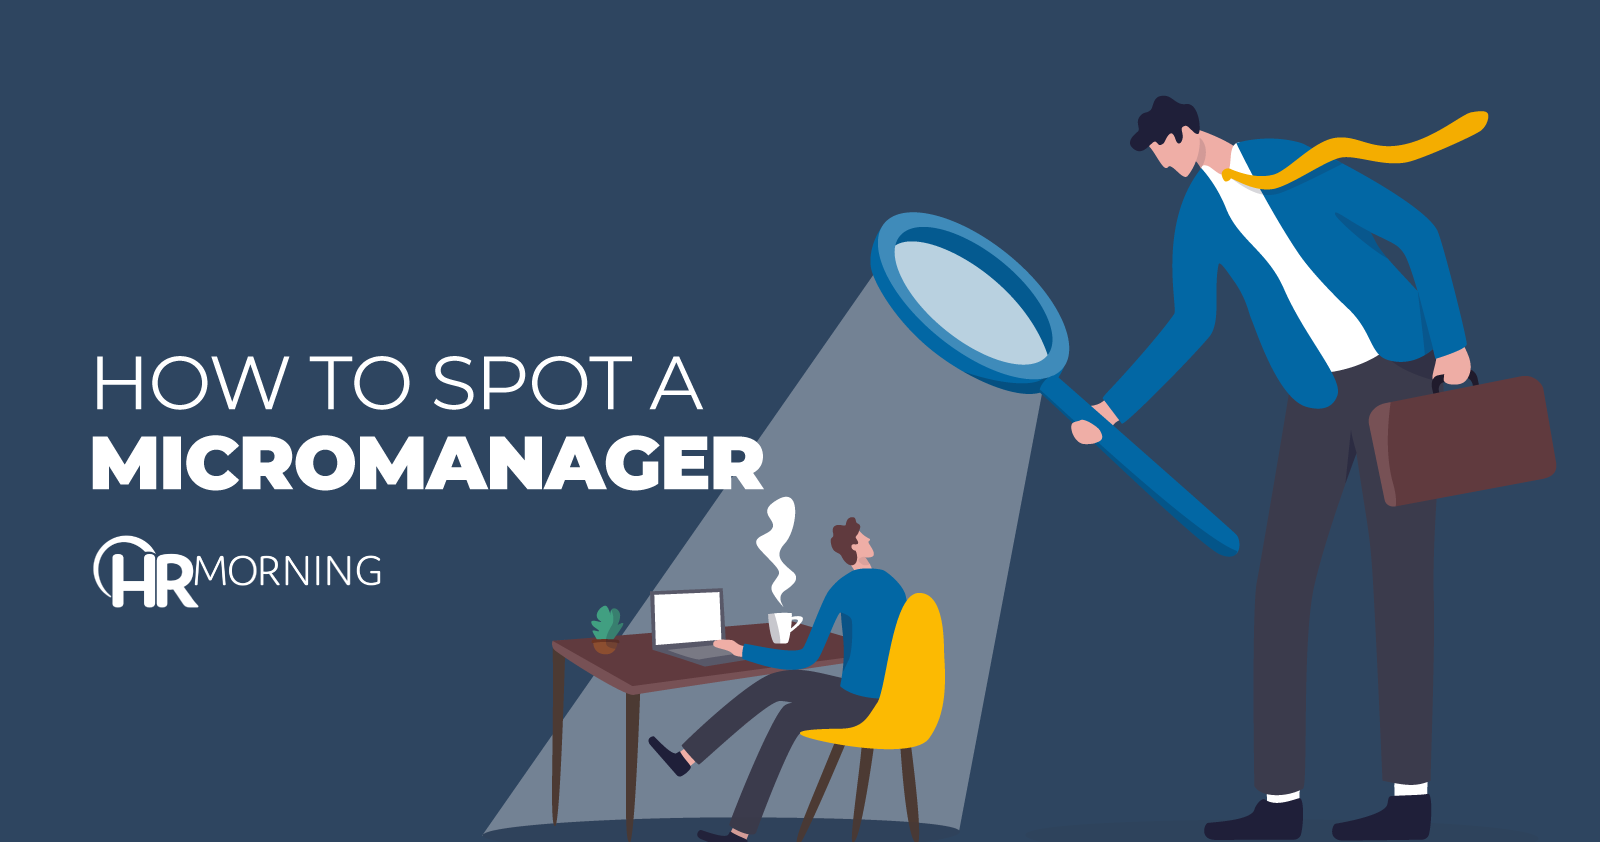 How To Spot A Micromanager